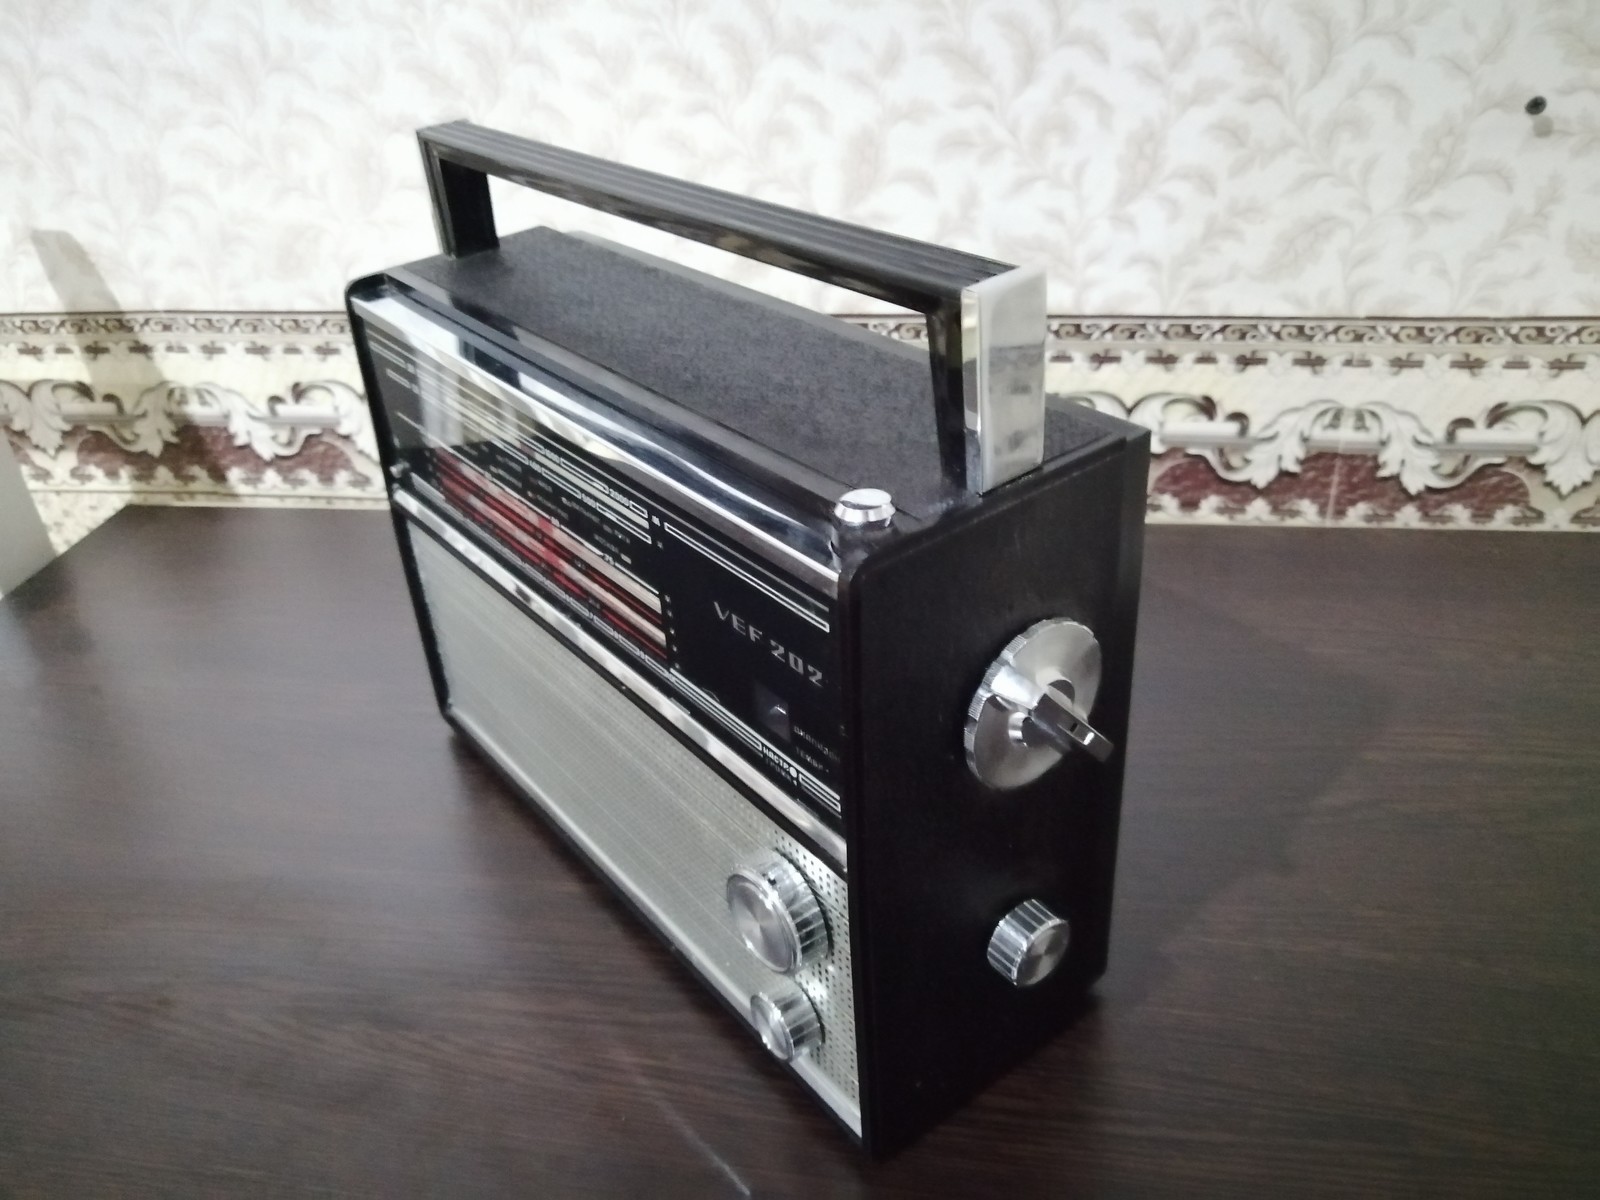 New receiver vef 202 - My, Technics, Made in USSR, the USSR, Longpost